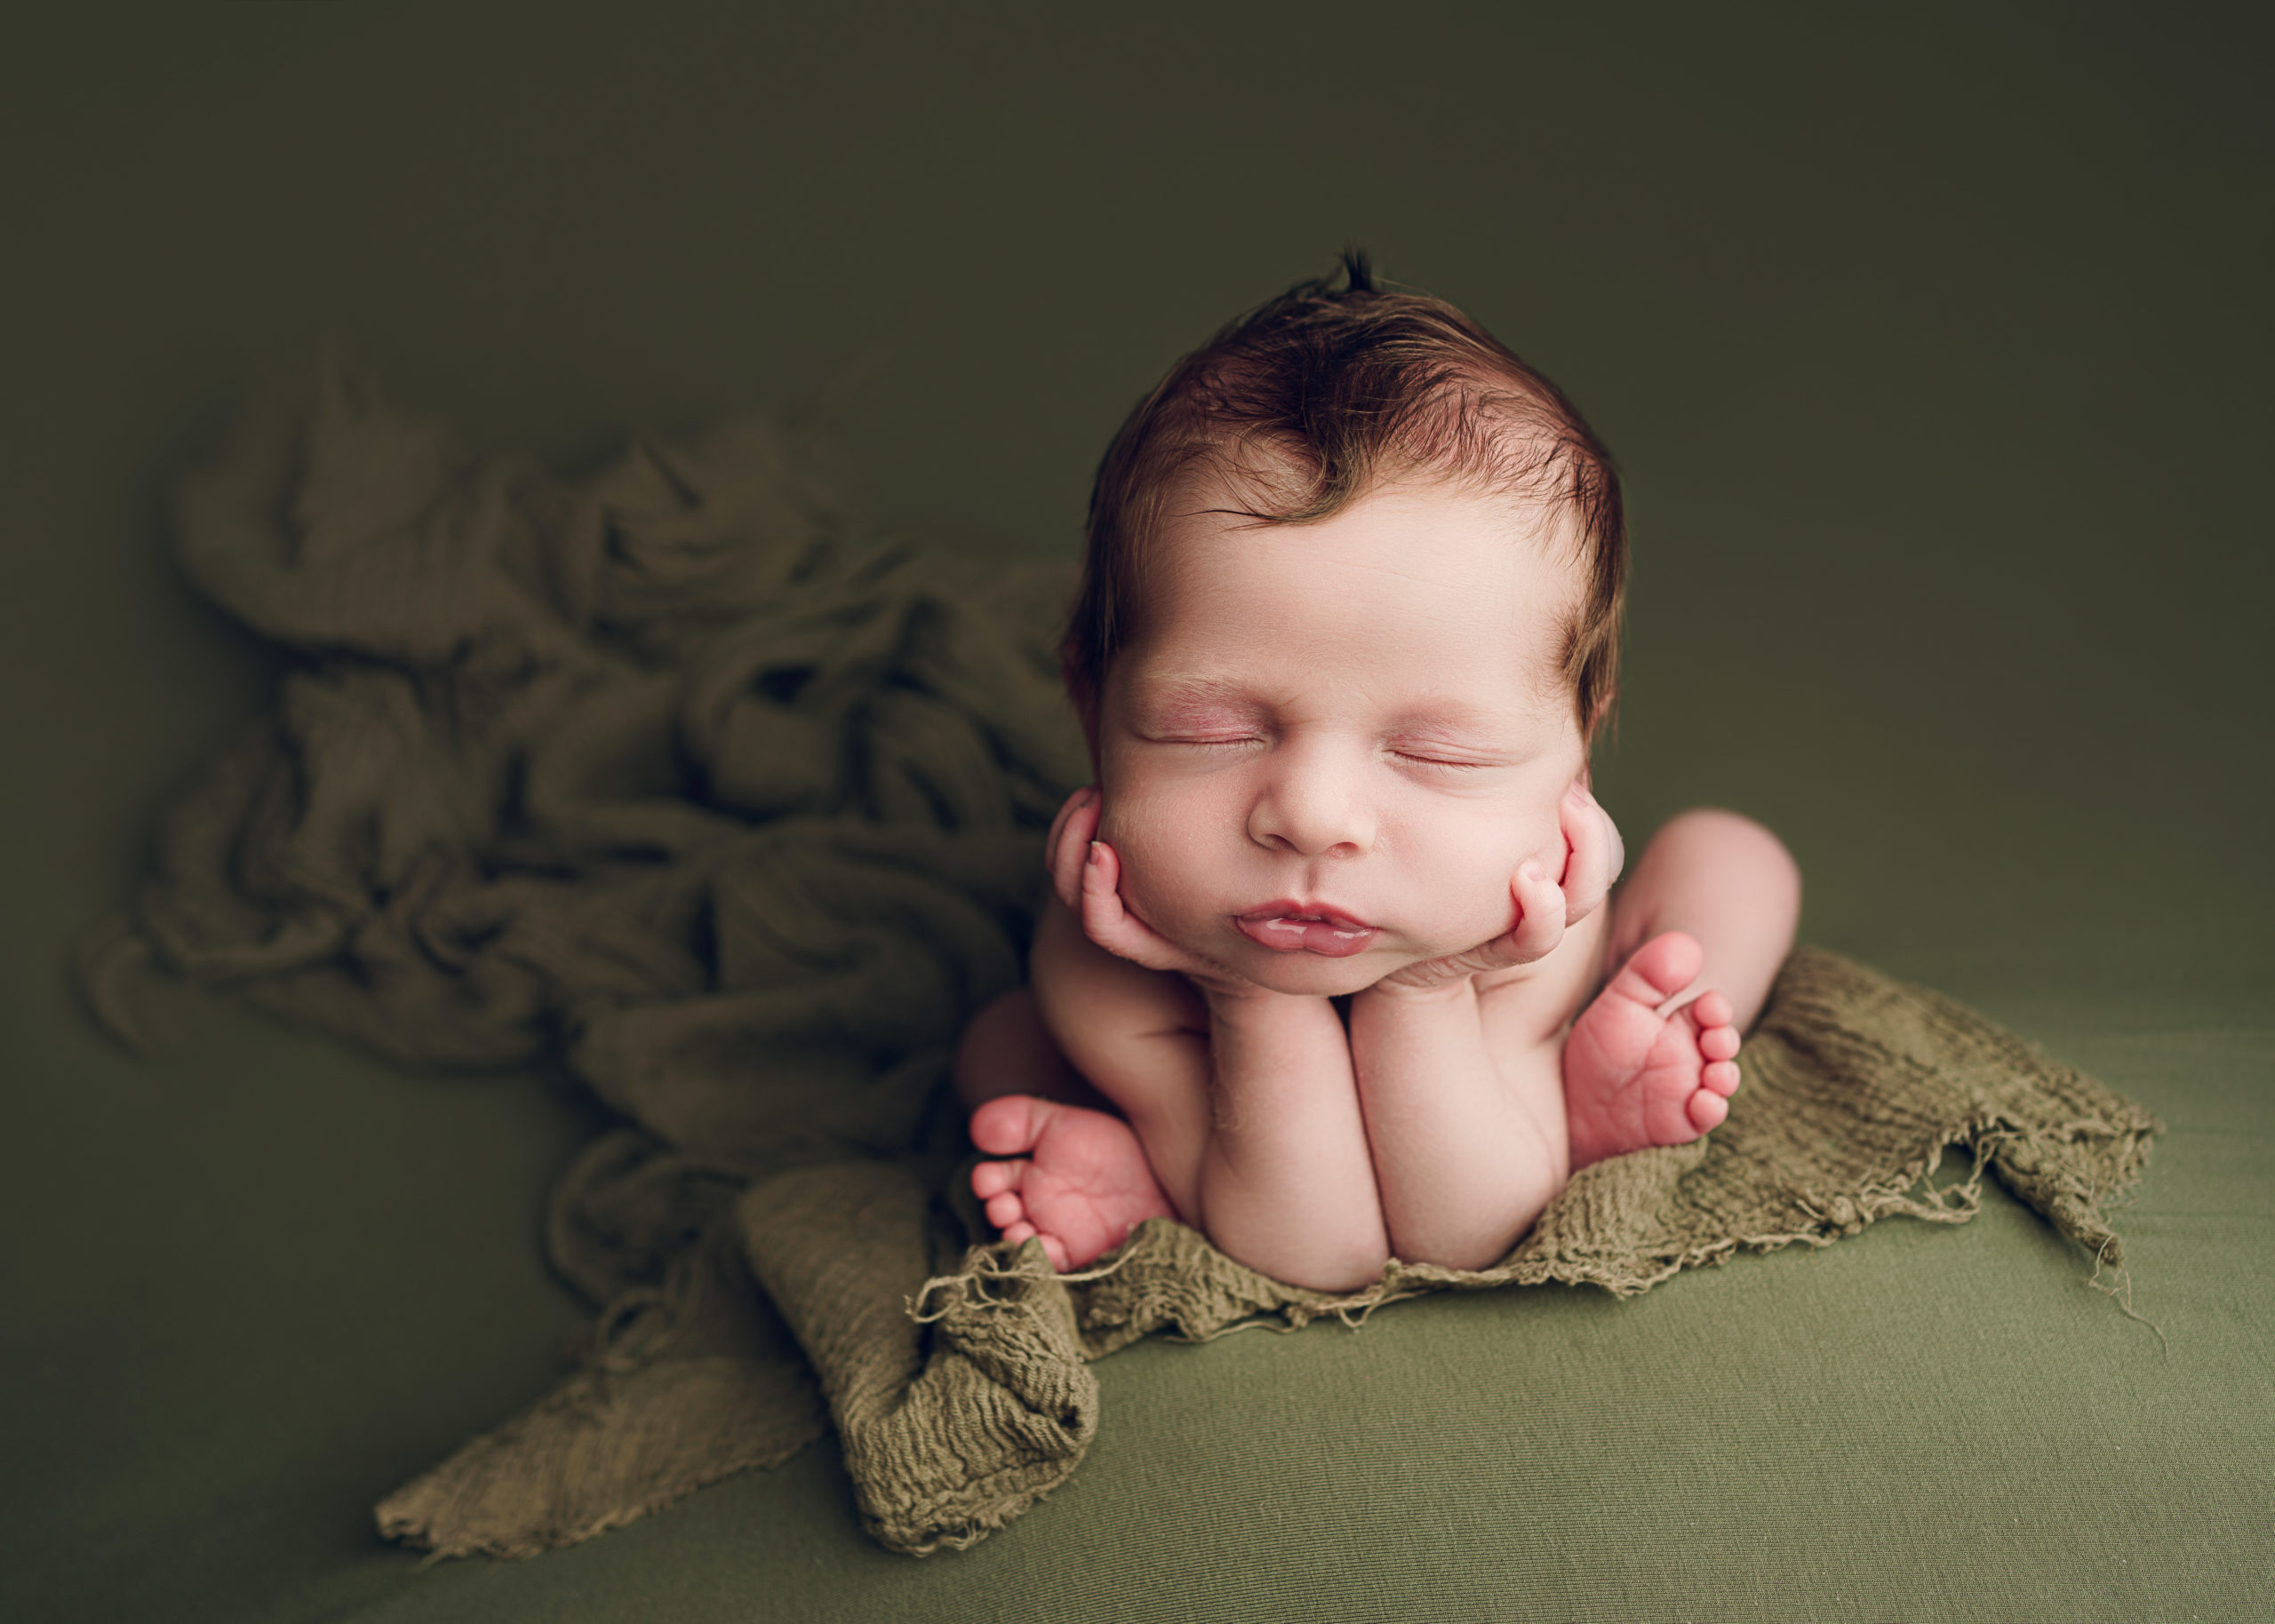 Is My Baby Too Old for Newborn Photos? | Kashele Photography